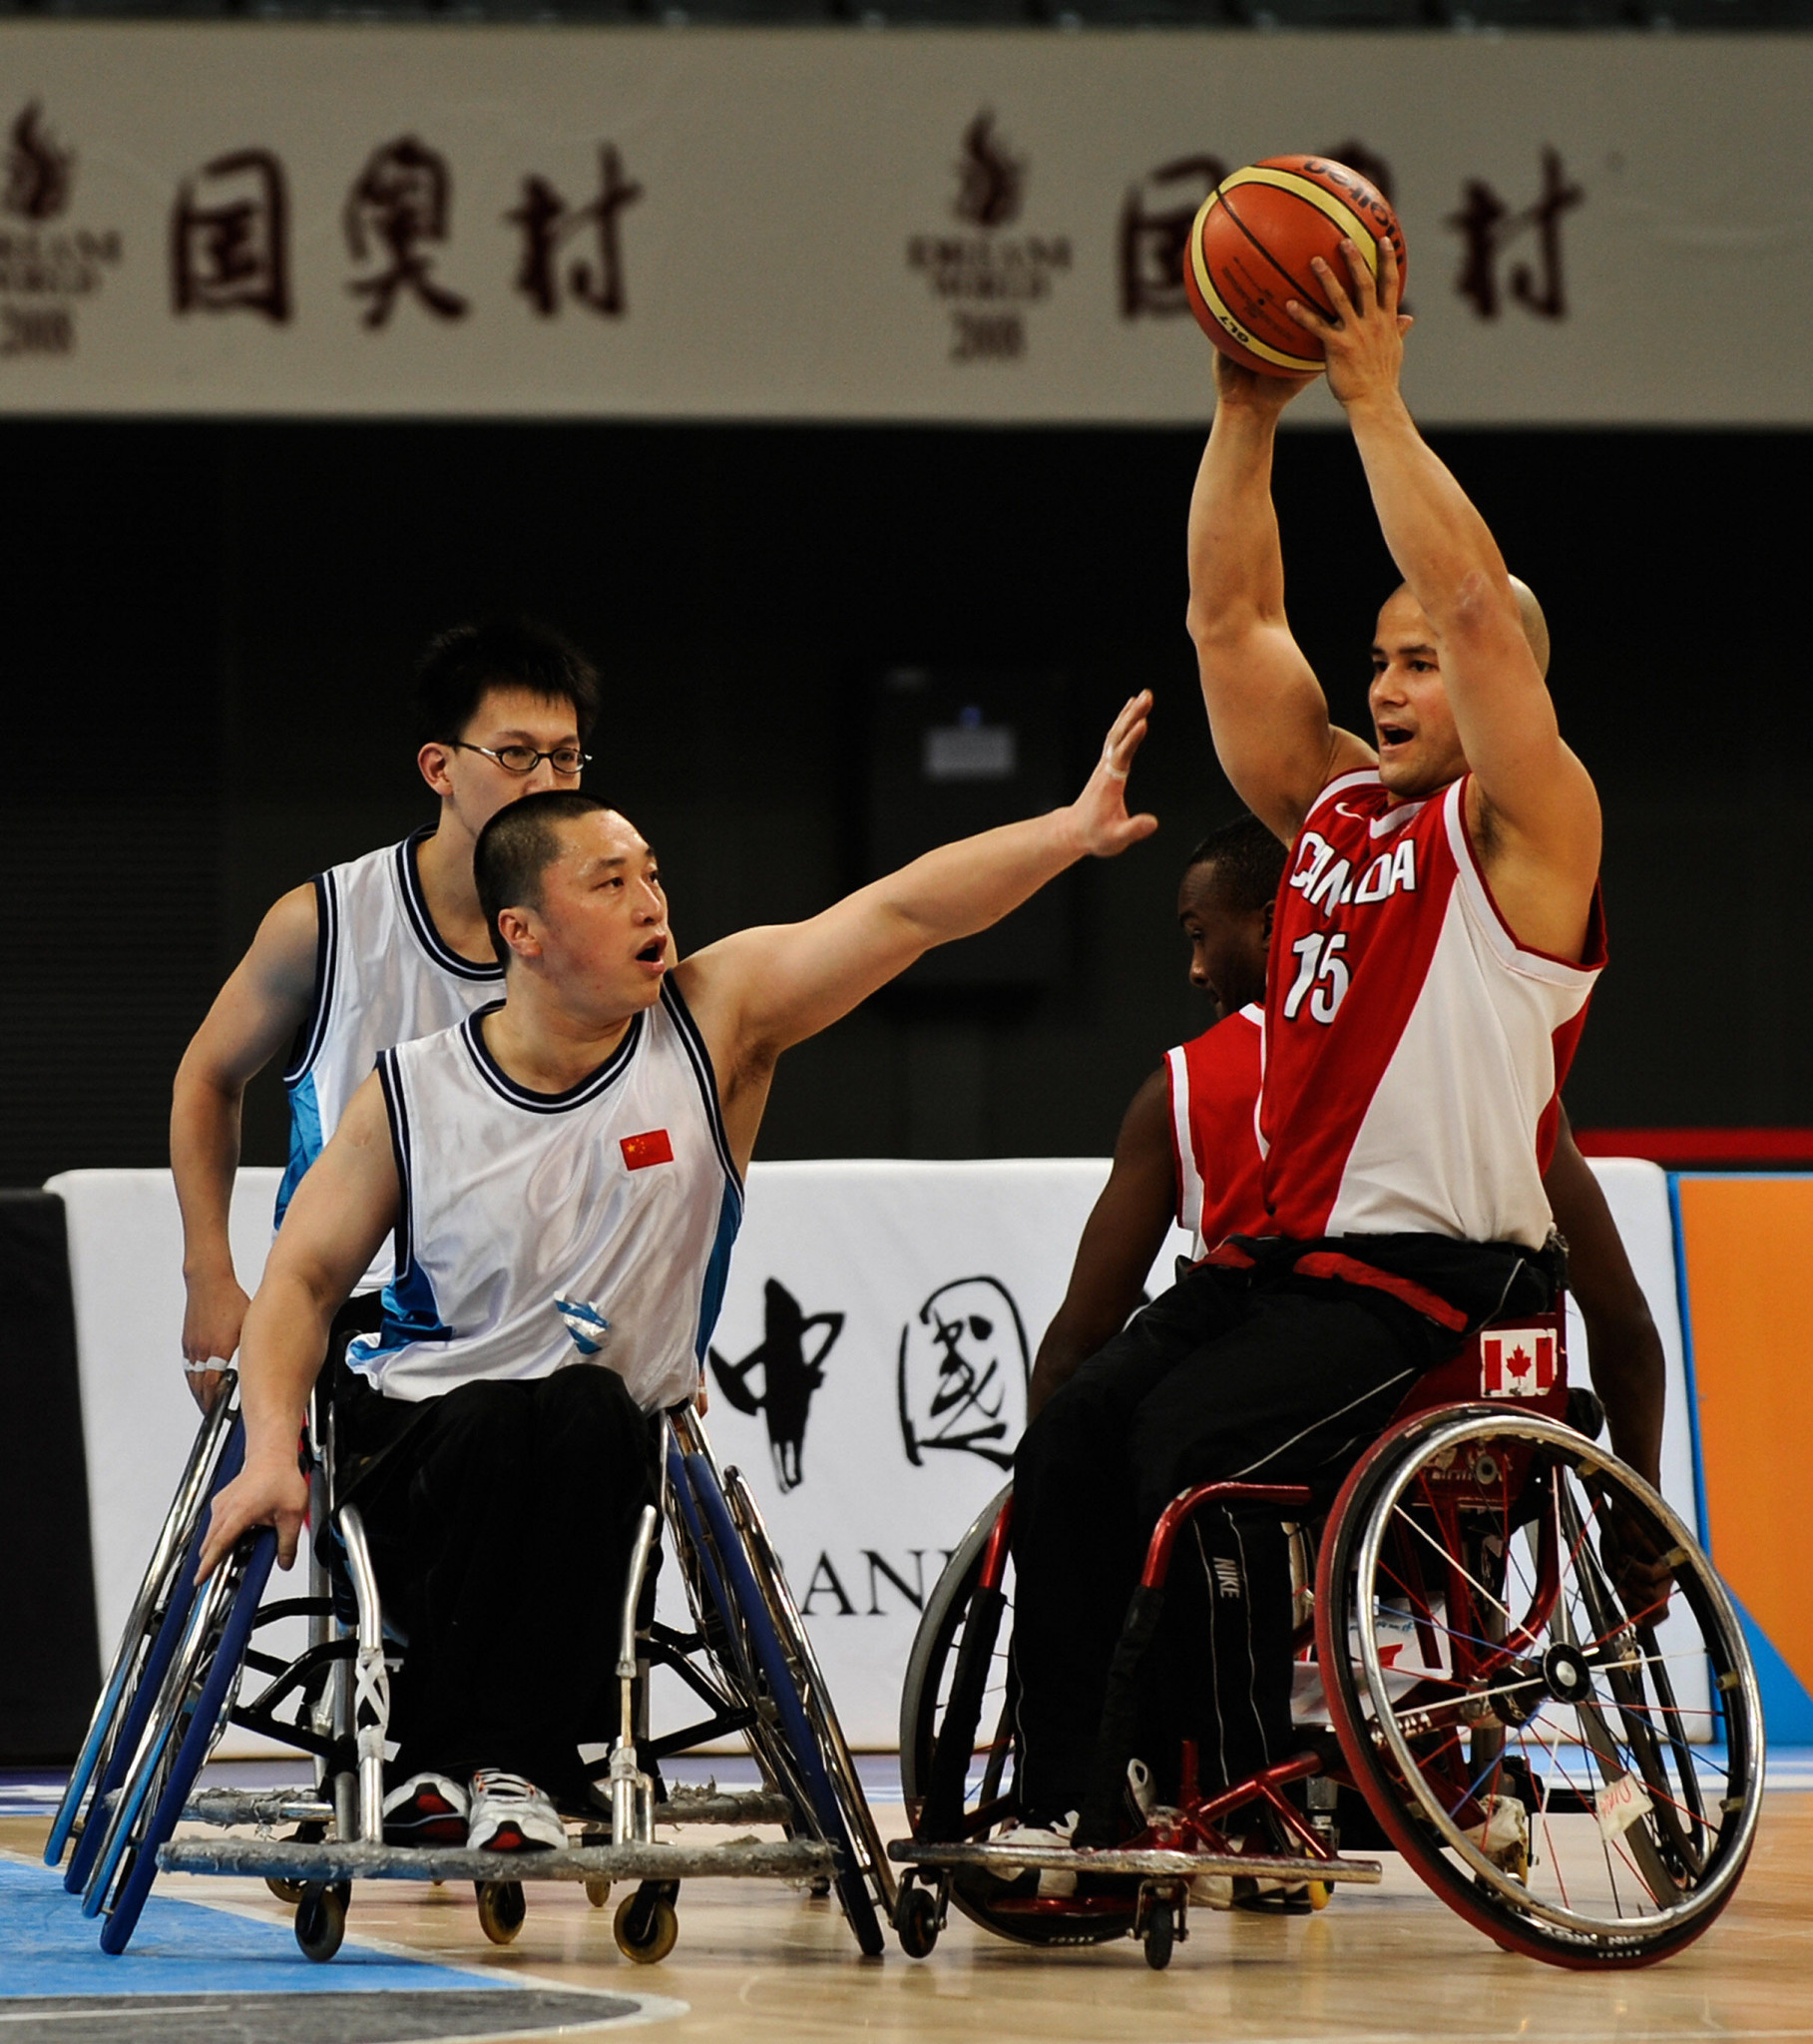 Double Paralympic champion ruled ineligible for wheelchair basketball as classification review begins